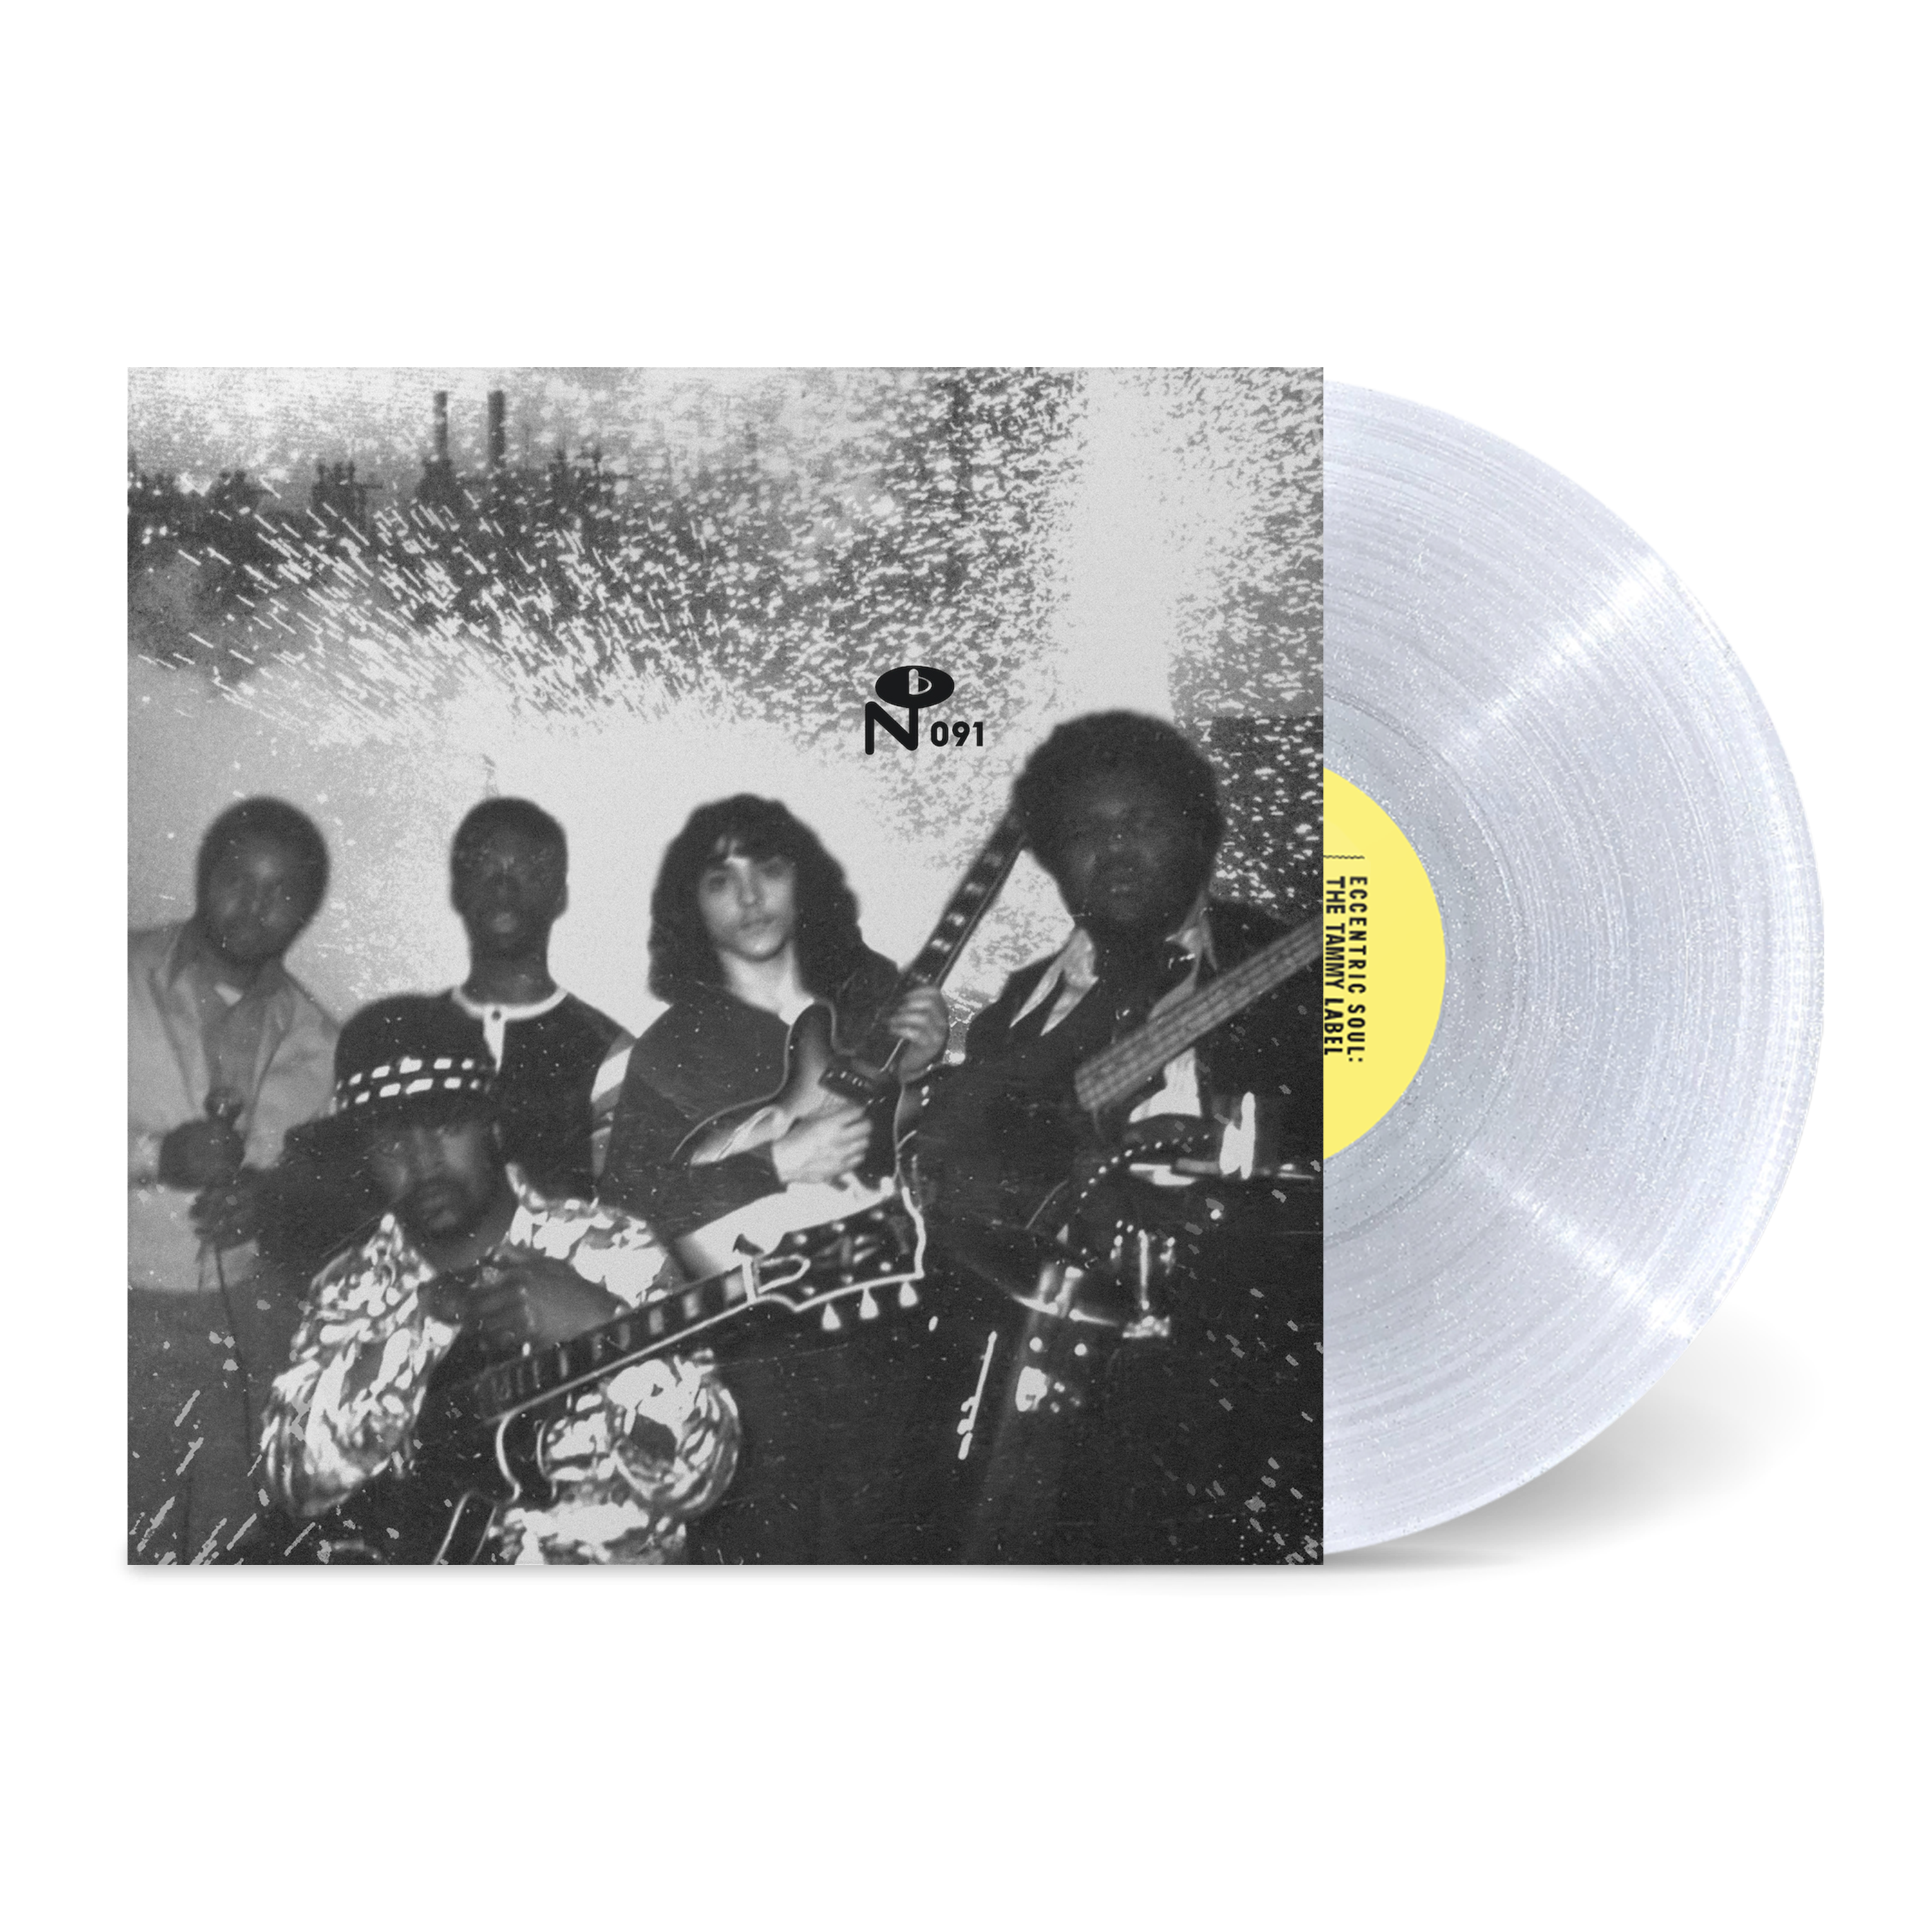 Various Artists - Eccentric Soul - The Tammy Label: Limited 'Sheer Magic' Transparent Silver Glitter Vinyl LP